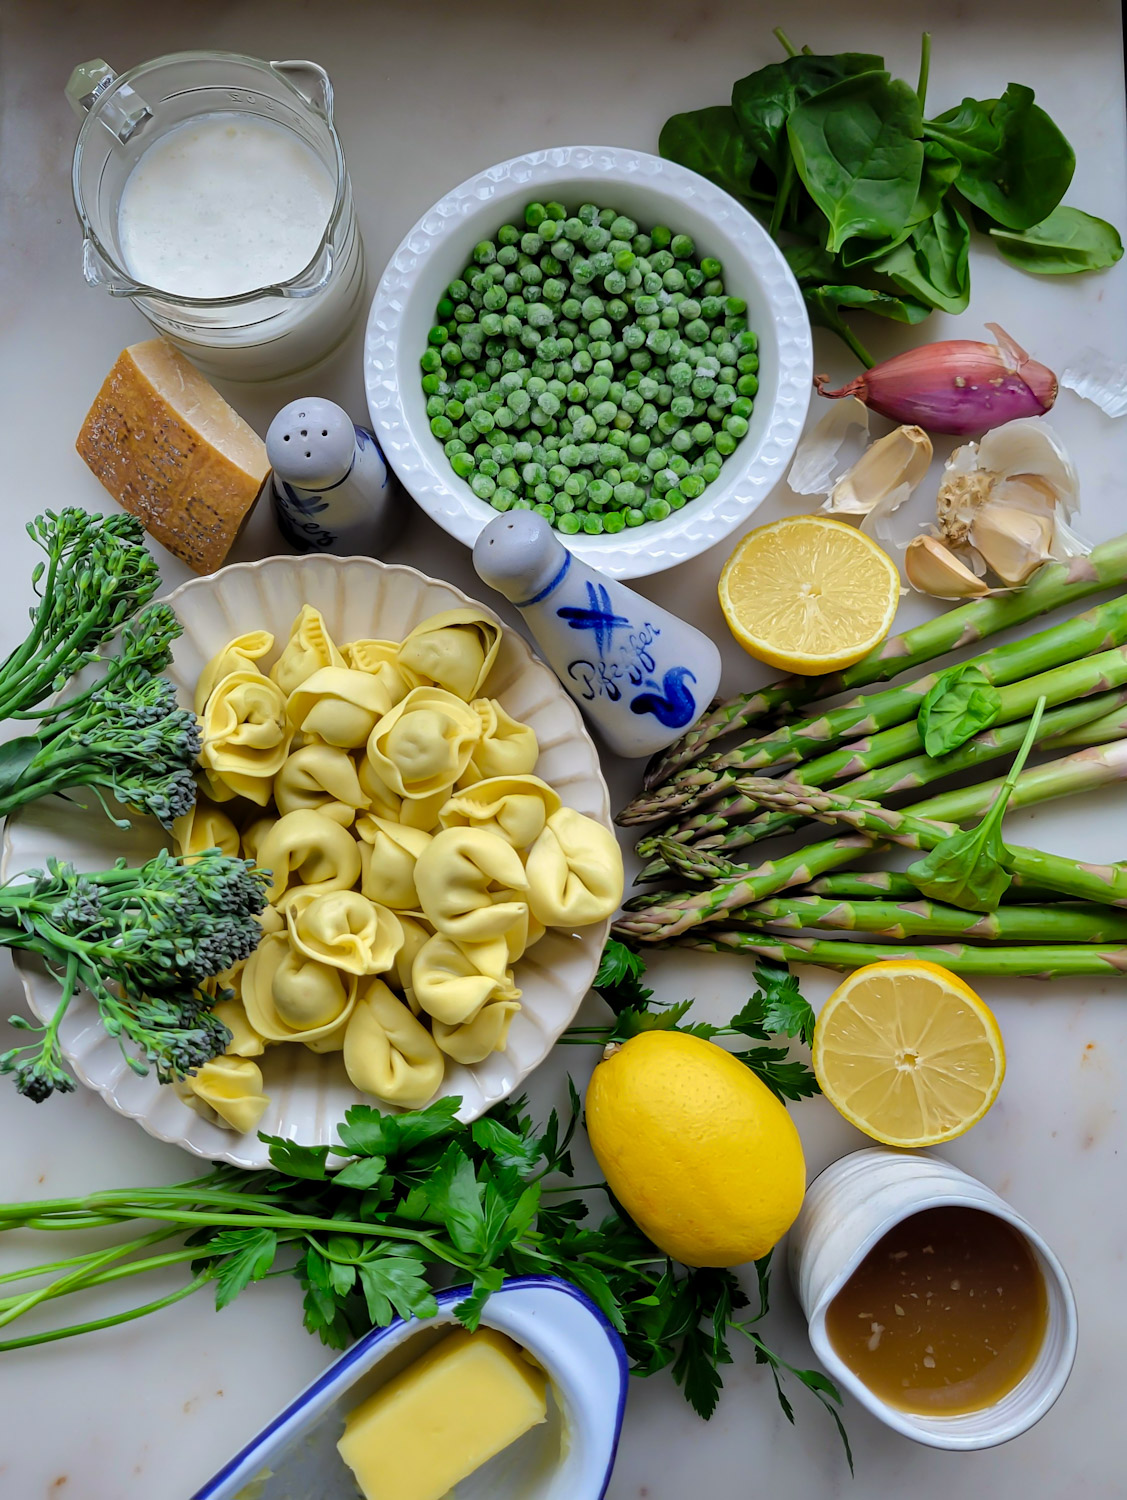 All the ingredients needed to make Lemon Cream Pasta with Spring Vegetables are spread out on the counter.